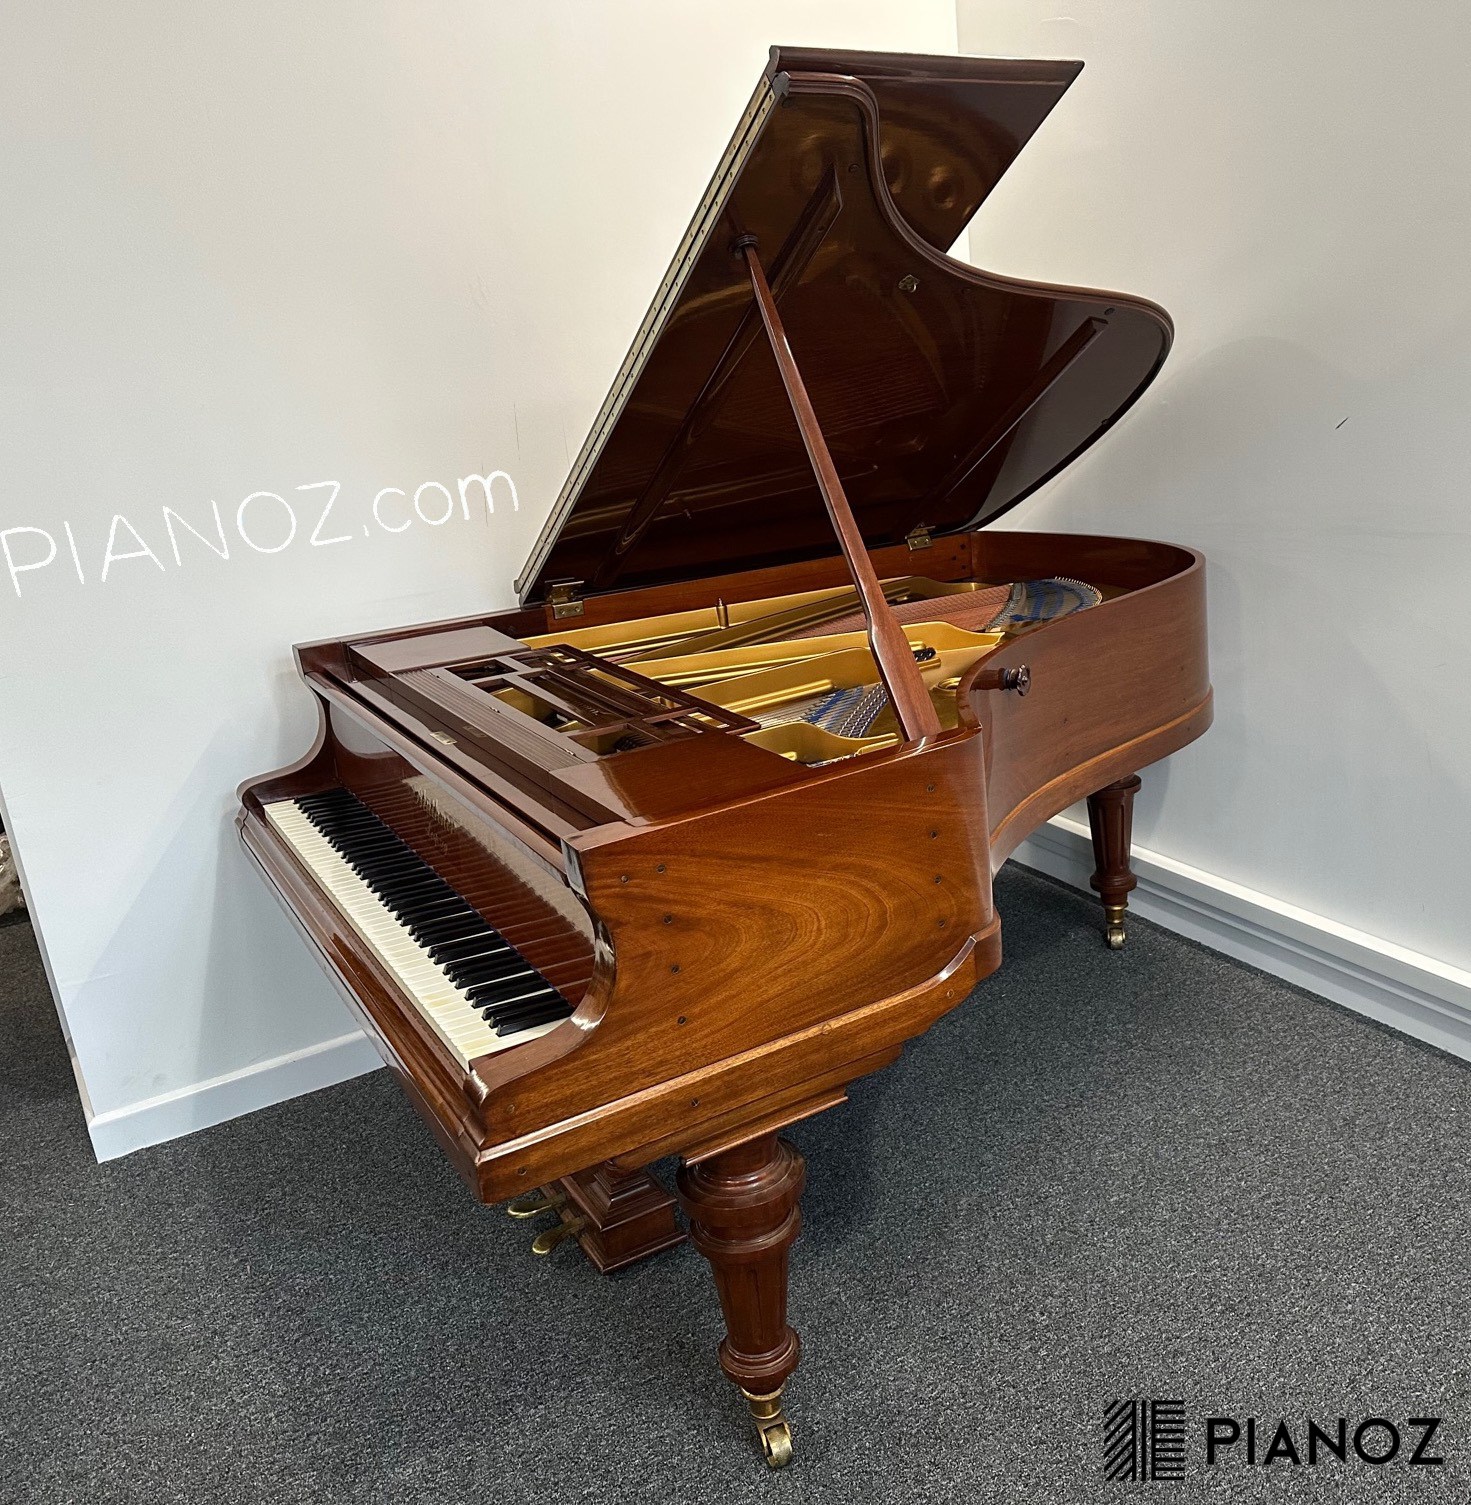 Bluthner Fully Restored Grand Piano piano for sale in UK